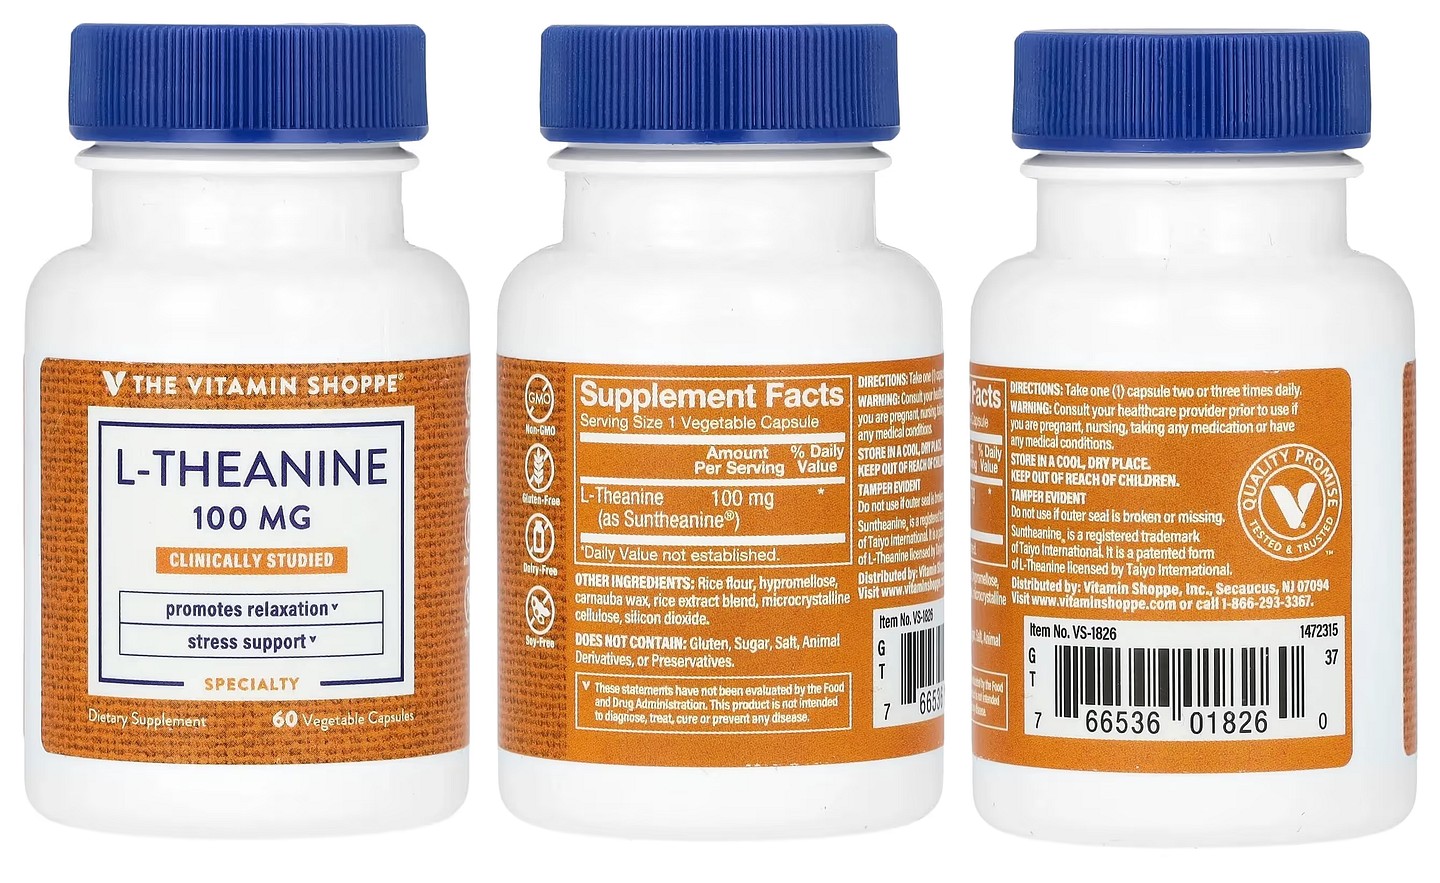 The Vitamin Shoppe, L-Theanine packaging